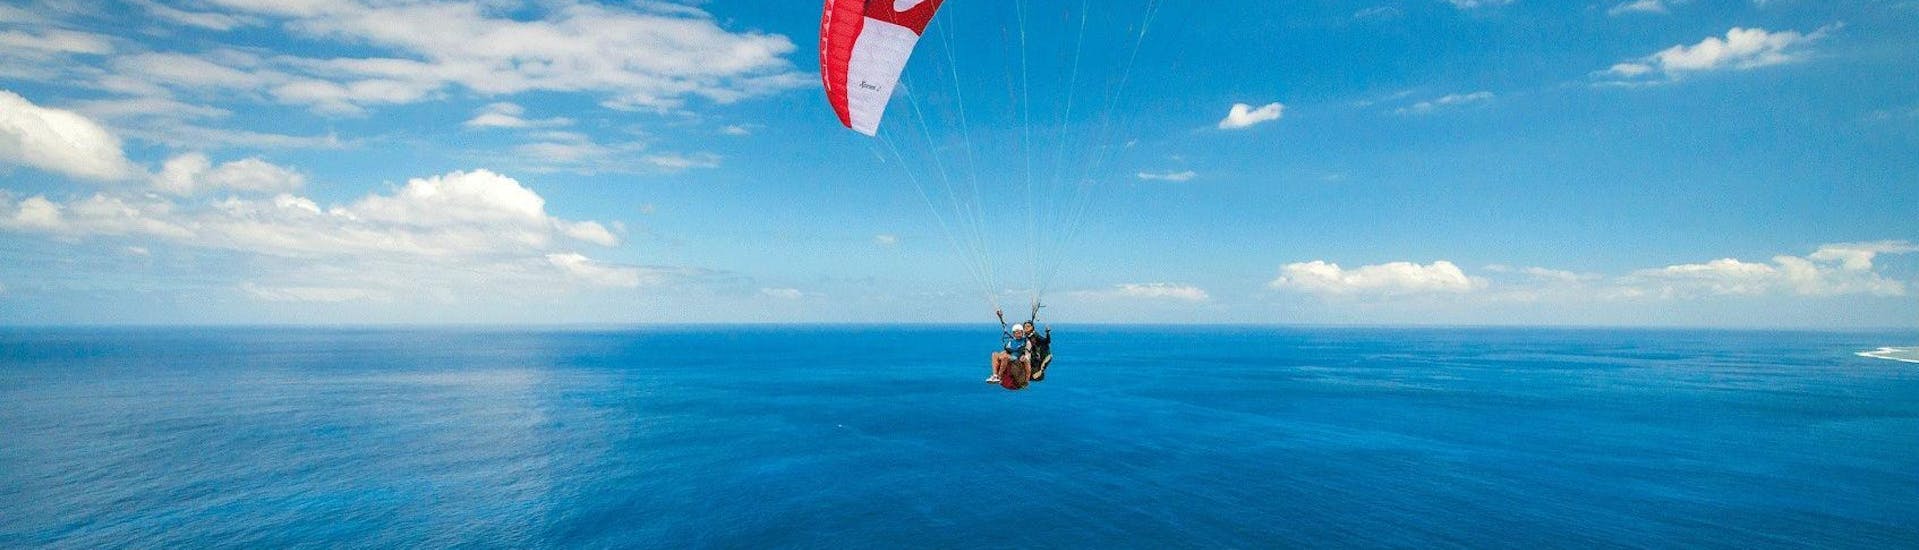 A paraglider pilot from Addict Parapente is flying over the Bay of St Leu during a Tandem Paragliding Flight "You Steer".